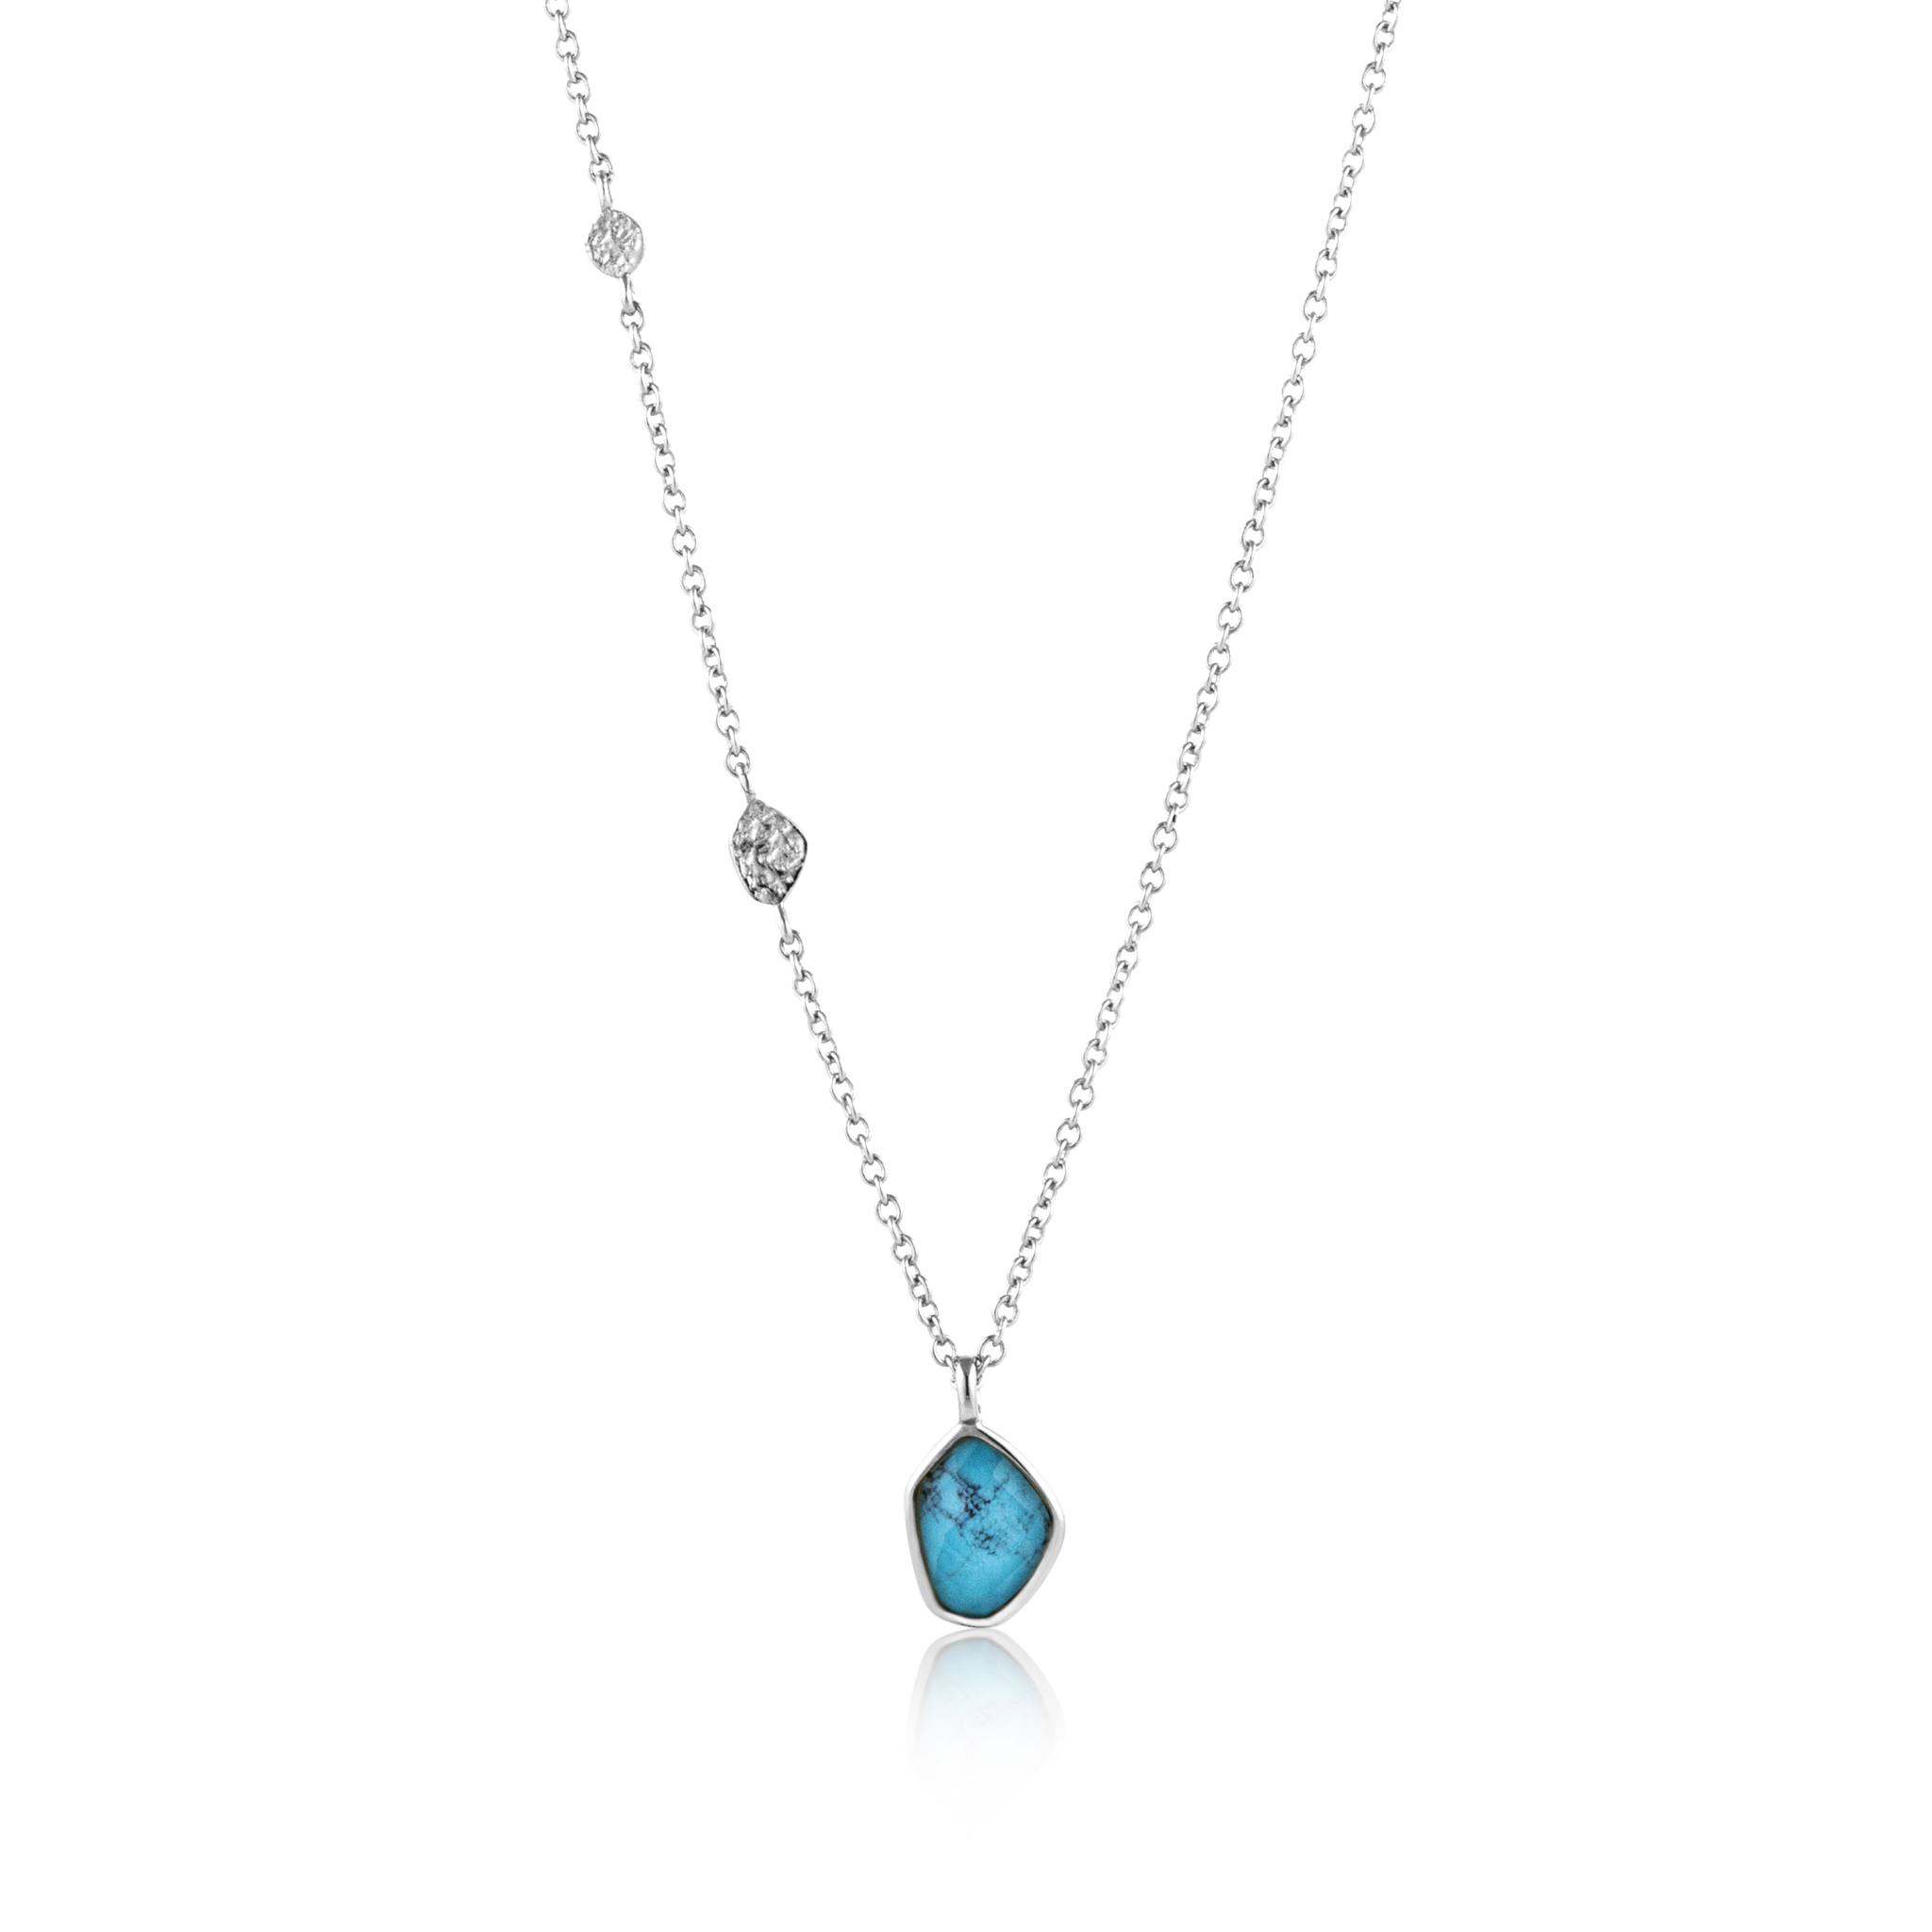 ANIA HAIE TURQUOISE PENDANT NECKLACE; GOLD TONE